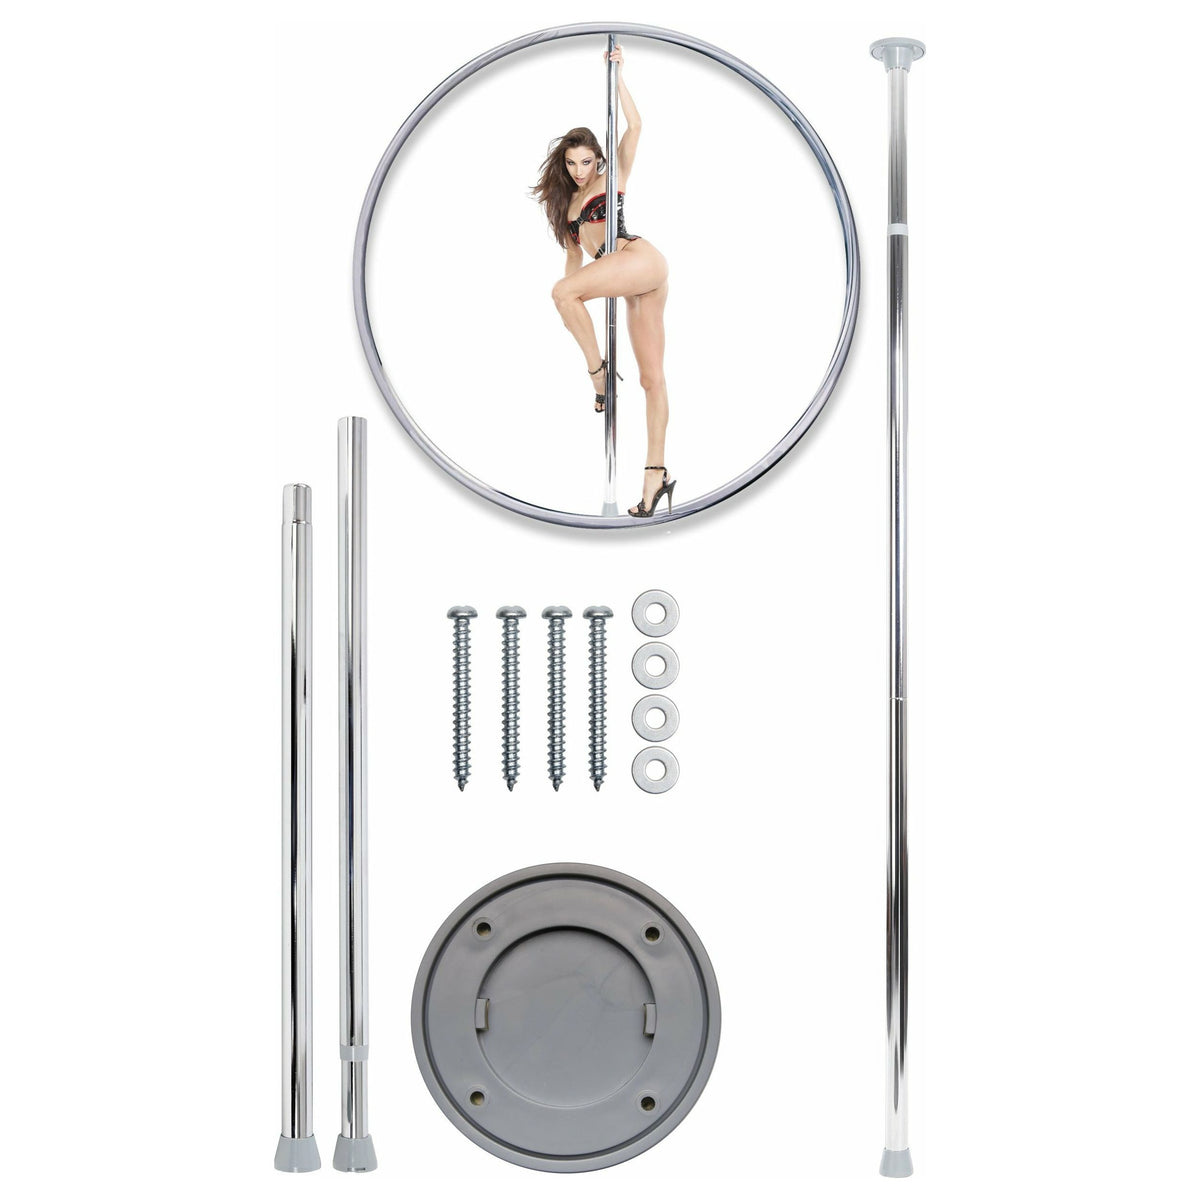 Pipedream Products Fetish Fantasy Dance Pole